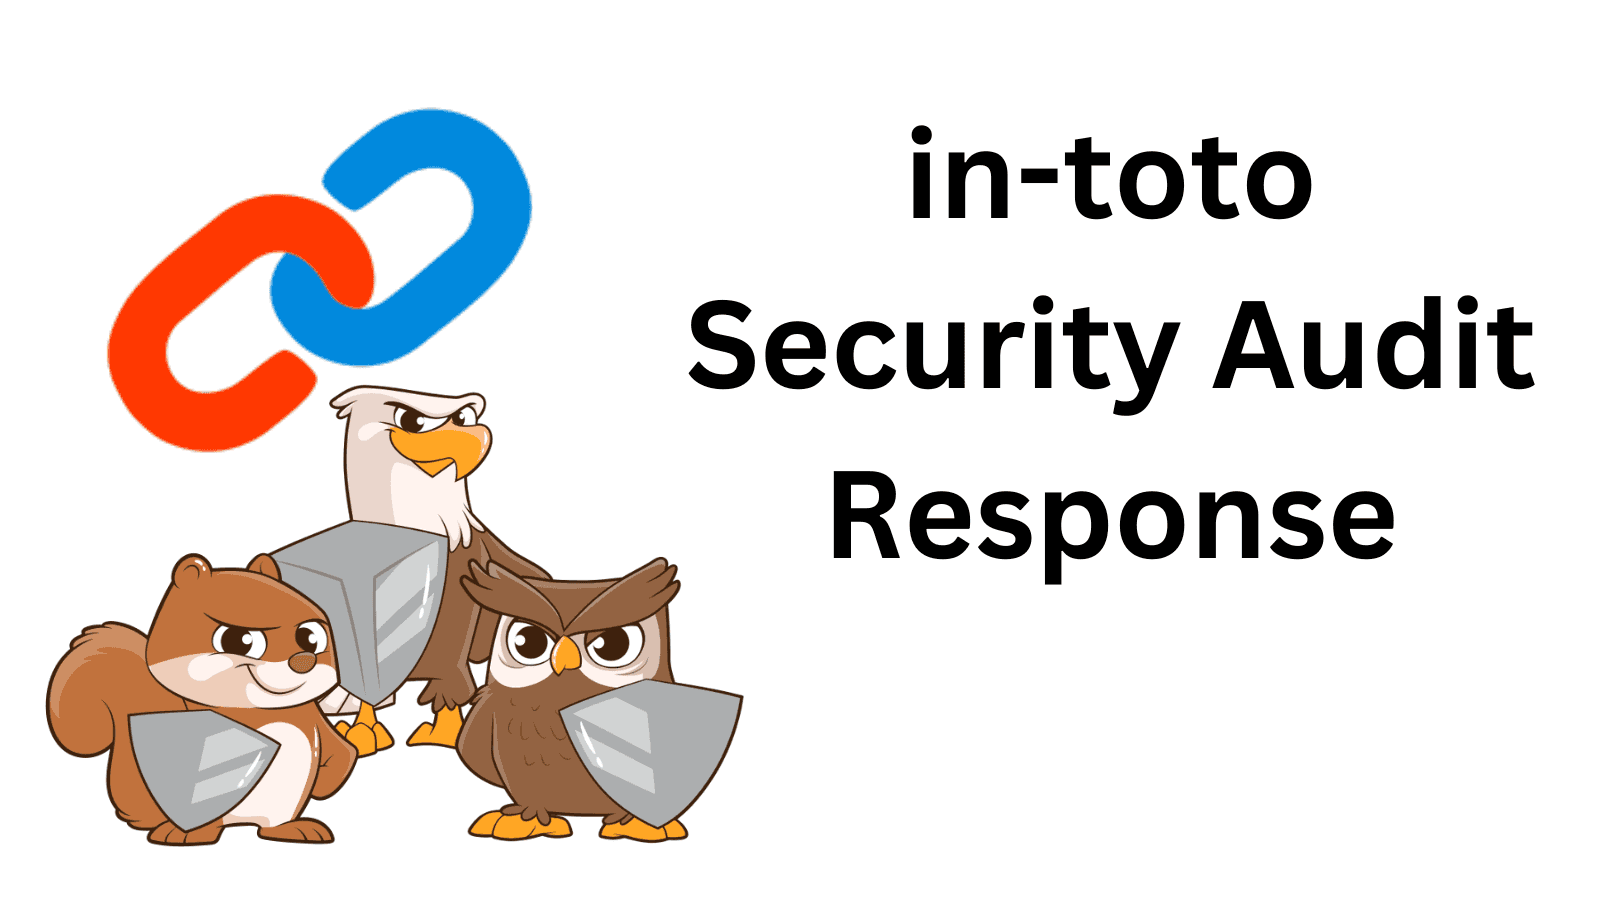 in-toto Security Audit